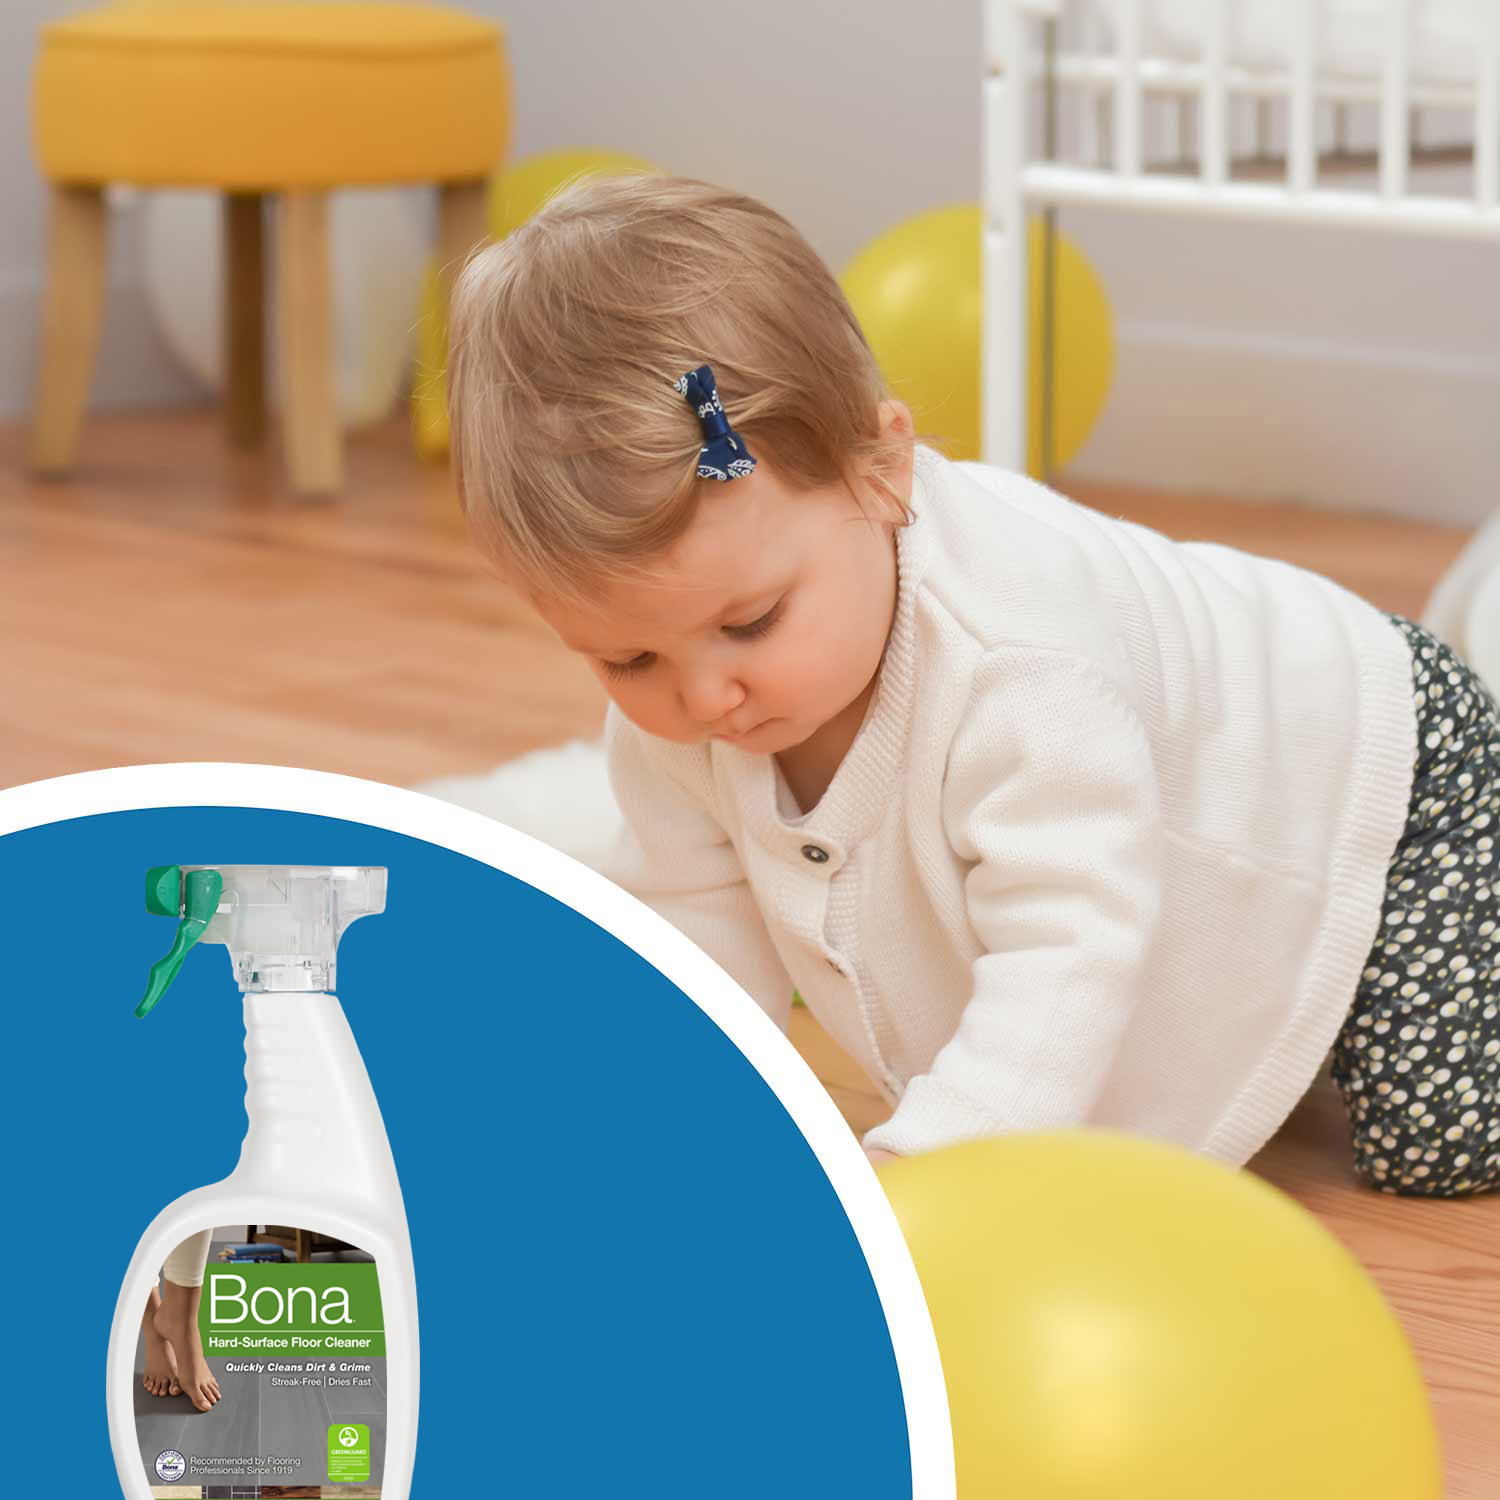 <p><strong>The&nbsp;Bona Hard-Surface Floor Cleaner</strong><a href="https://us.bona.com/products/stl-cleaner-36oz.html"><strong>&nbsp;</strong></a><strong>is an excellent choice for cleaning luxury vinyl flooring and other hard surface floors.&nbsp;</strong>Safe to use around pets and children, our floor cleaner dries fast and leaves no residue&mdash;the perfect choice when you don&rsquo;t want your floors to get in the way of your life.</p><br/>